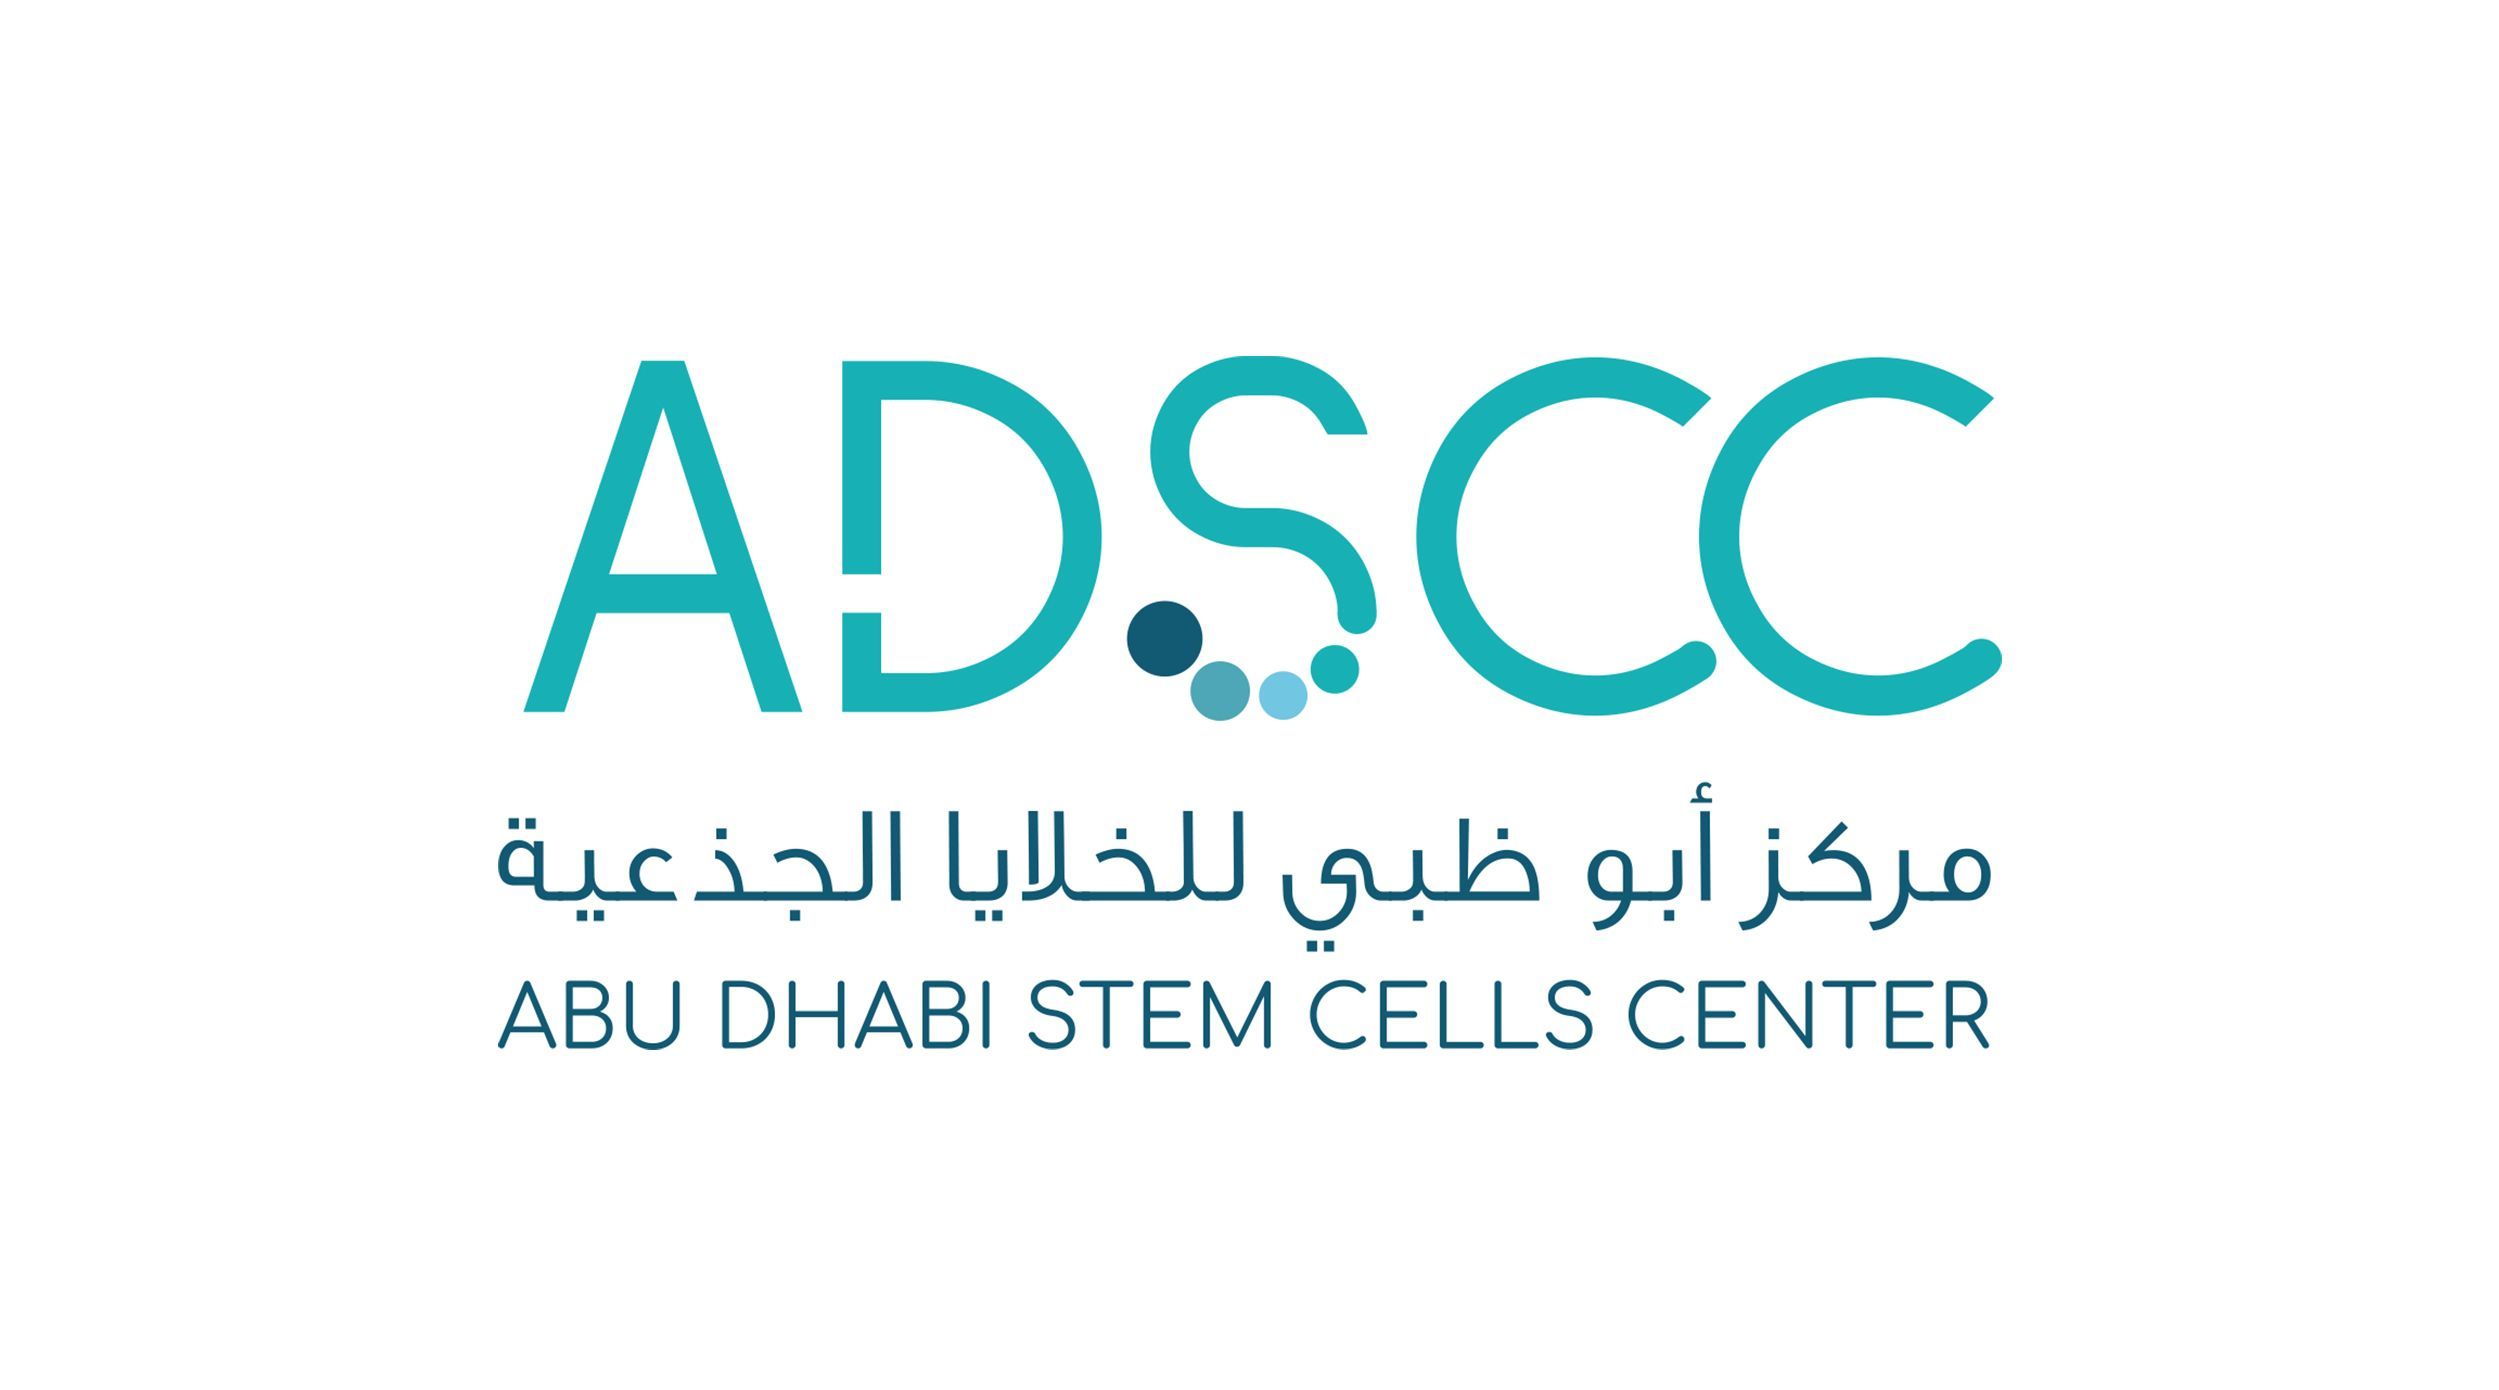 UAE has been able to develop an innovative coronavirus stem-cell treatment